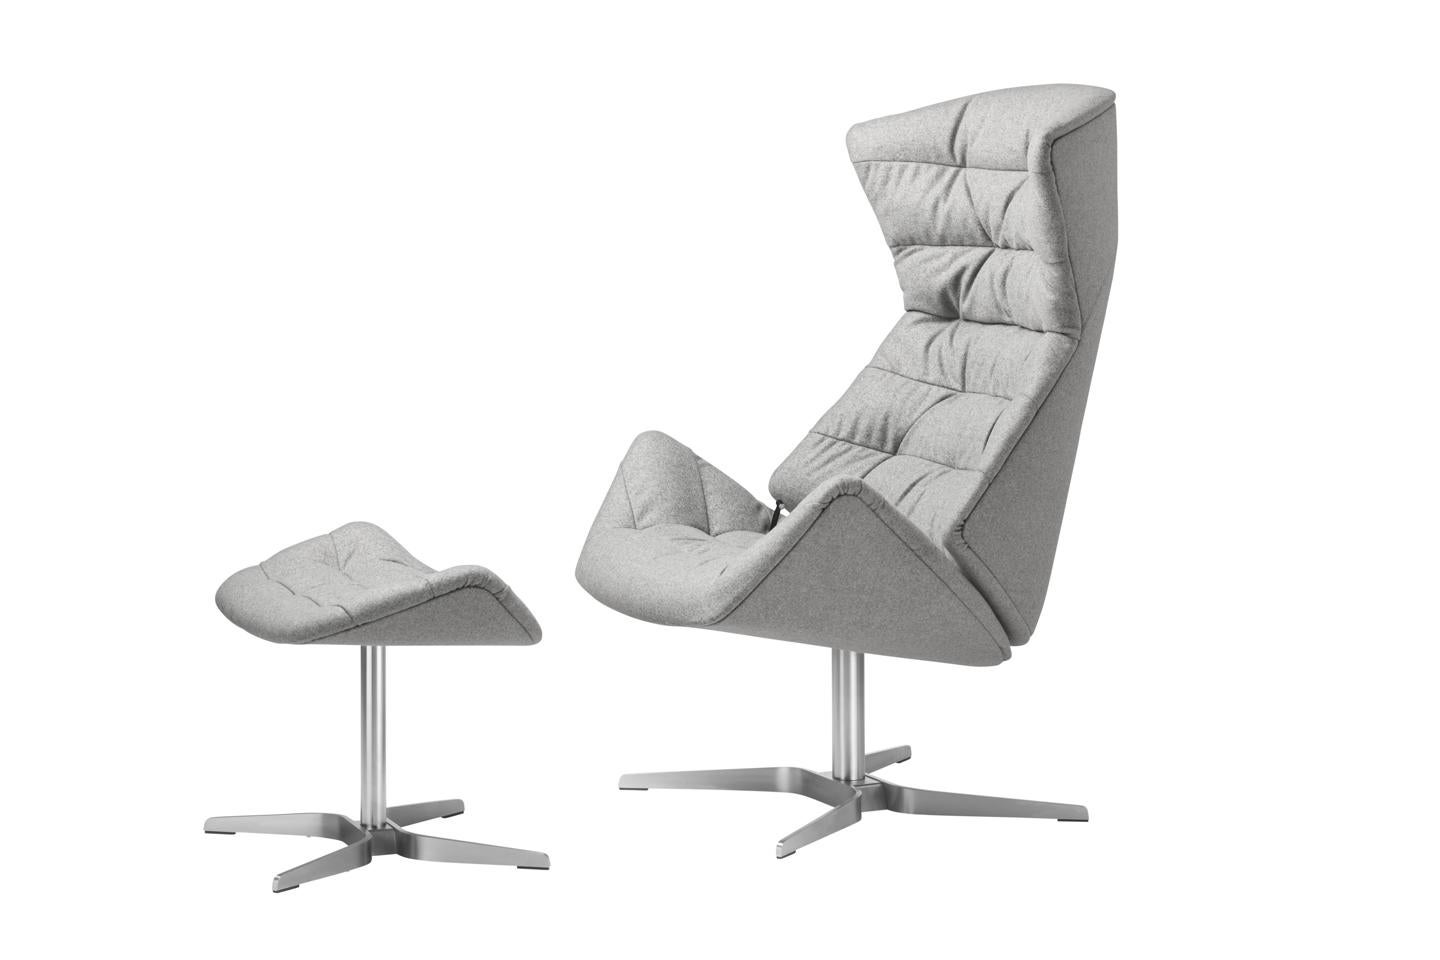 RANGE 808
With the range 808, Munich based design studio Formstelle has created a lounge chair that combines maximum comfort with numerous possibilities for individualization. The lounge chair 808 plays with the contrast between a protective shell